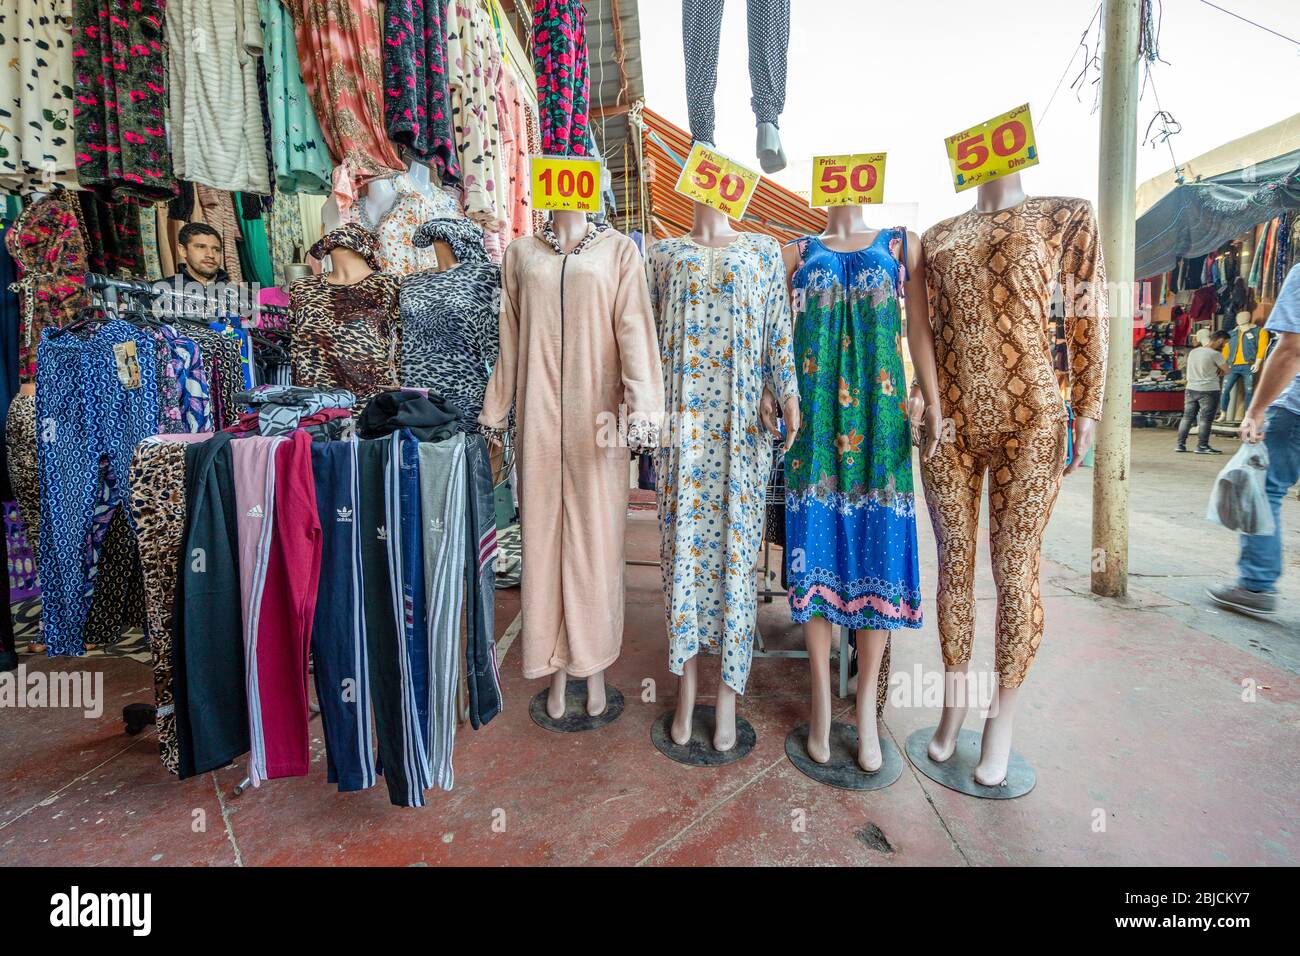 Agadir, Morocco - March 19, 2020: Colorful trousers, pajamas, night dresses and its arabic vendor on north African open air market Stock Photo